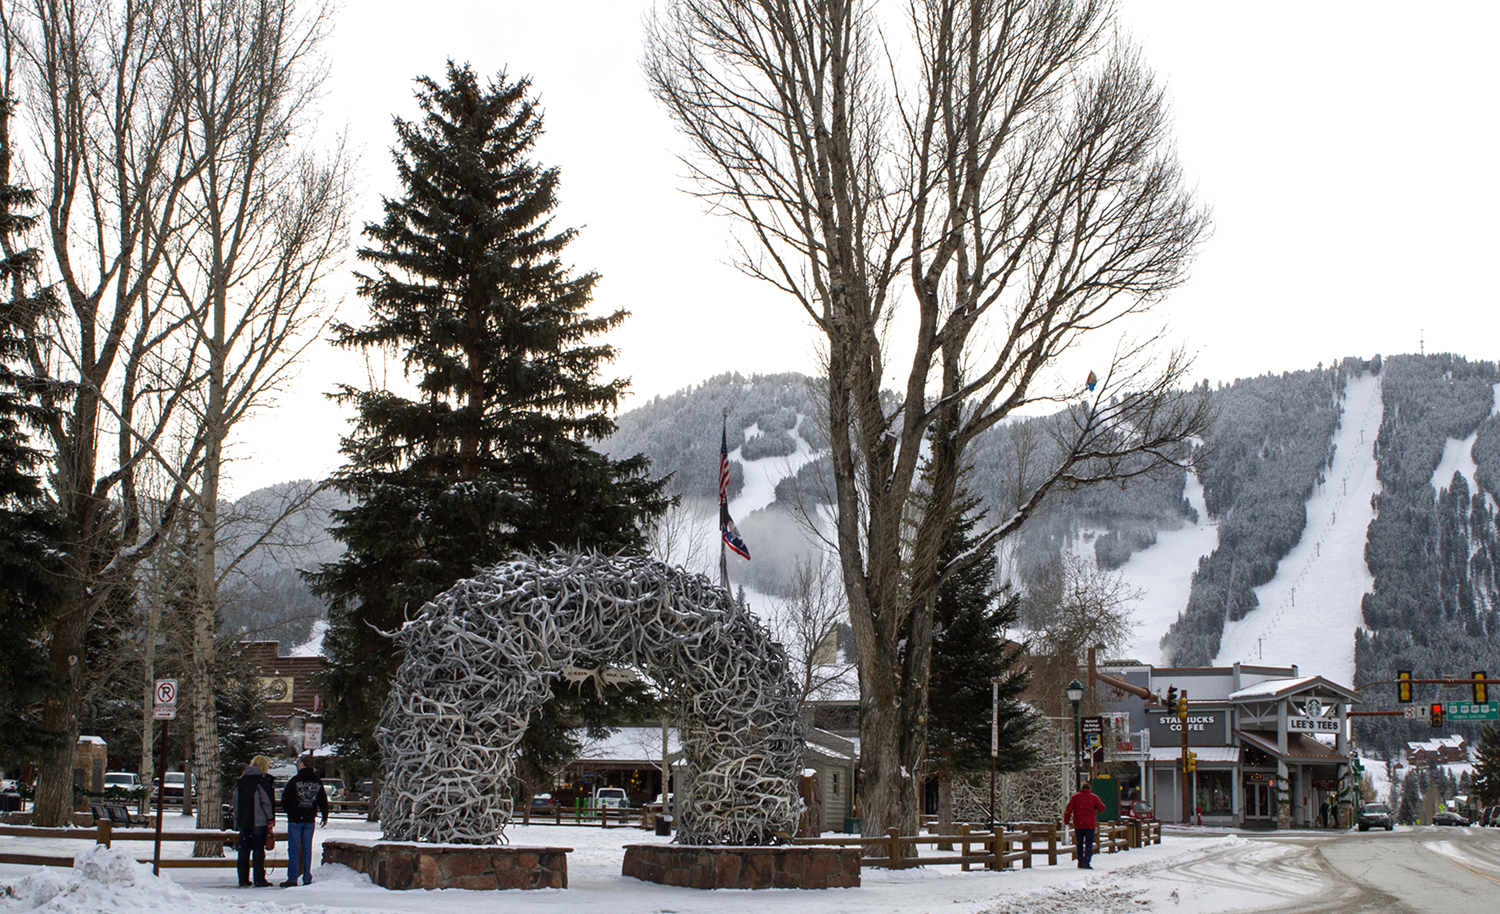 Jackson Town Square with its iconic elk antler arches hosts ice skating throughout Jackson Hole WinterFest, while Snow King Mountain is the venue for events including slalom ski racing.